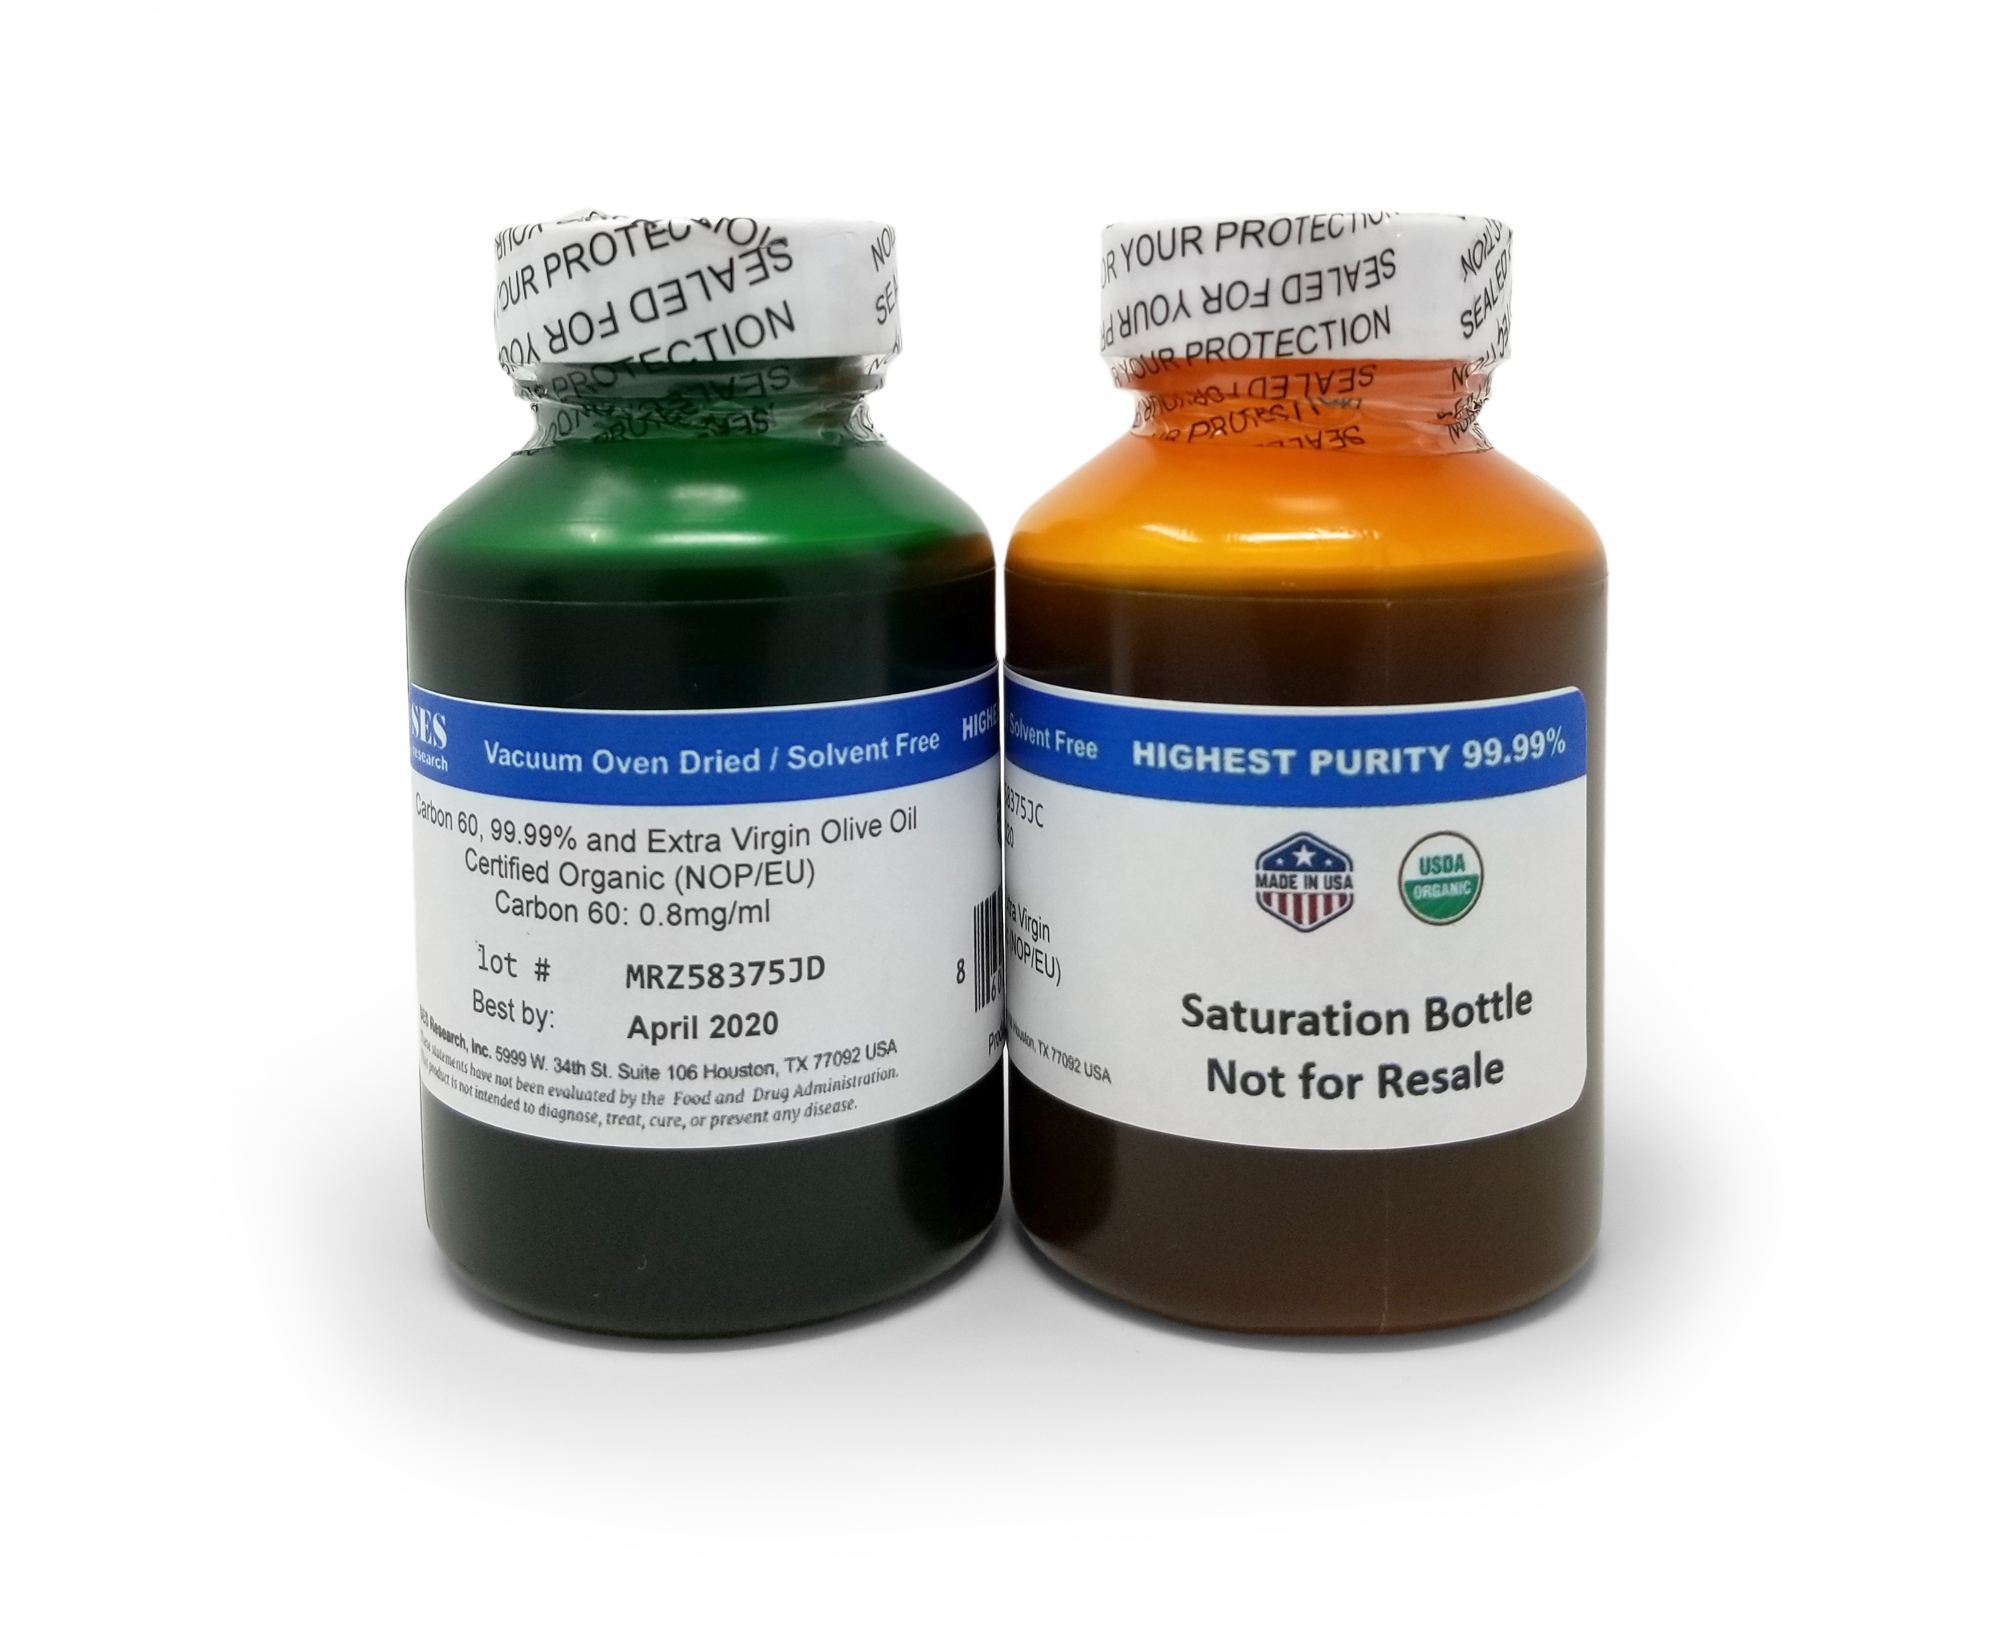 What’s a Saturation Bottle?